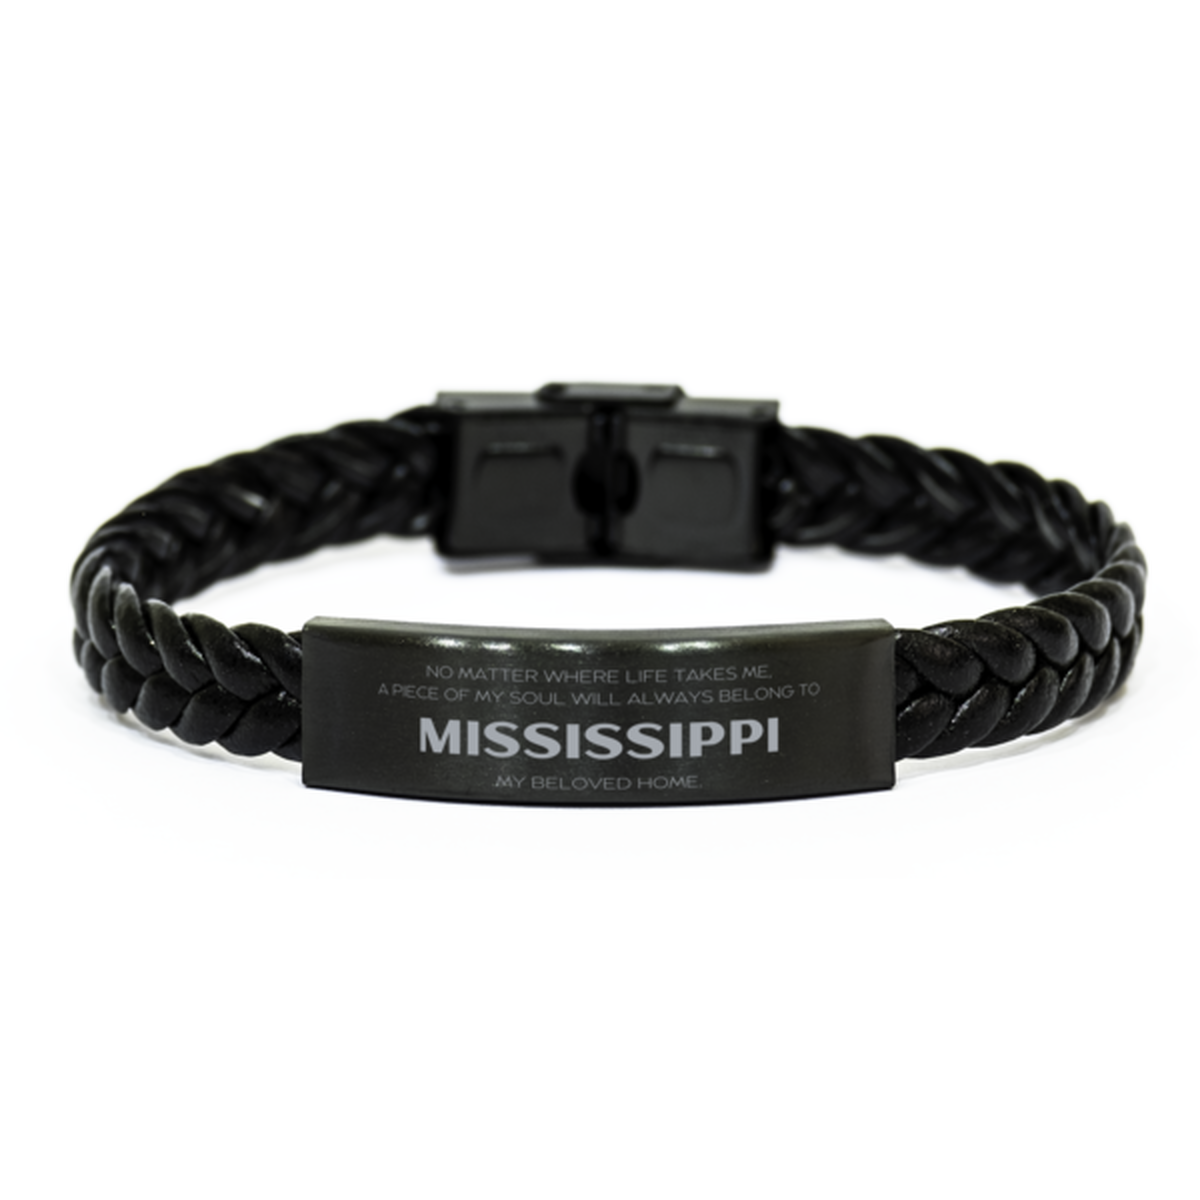 Love Mississippi State Gifts, My soul will always belong to Mississippi, Proud Braided Leather Bracelet, Birthday Unique Gifts For Mississippi Men, Women, Friends